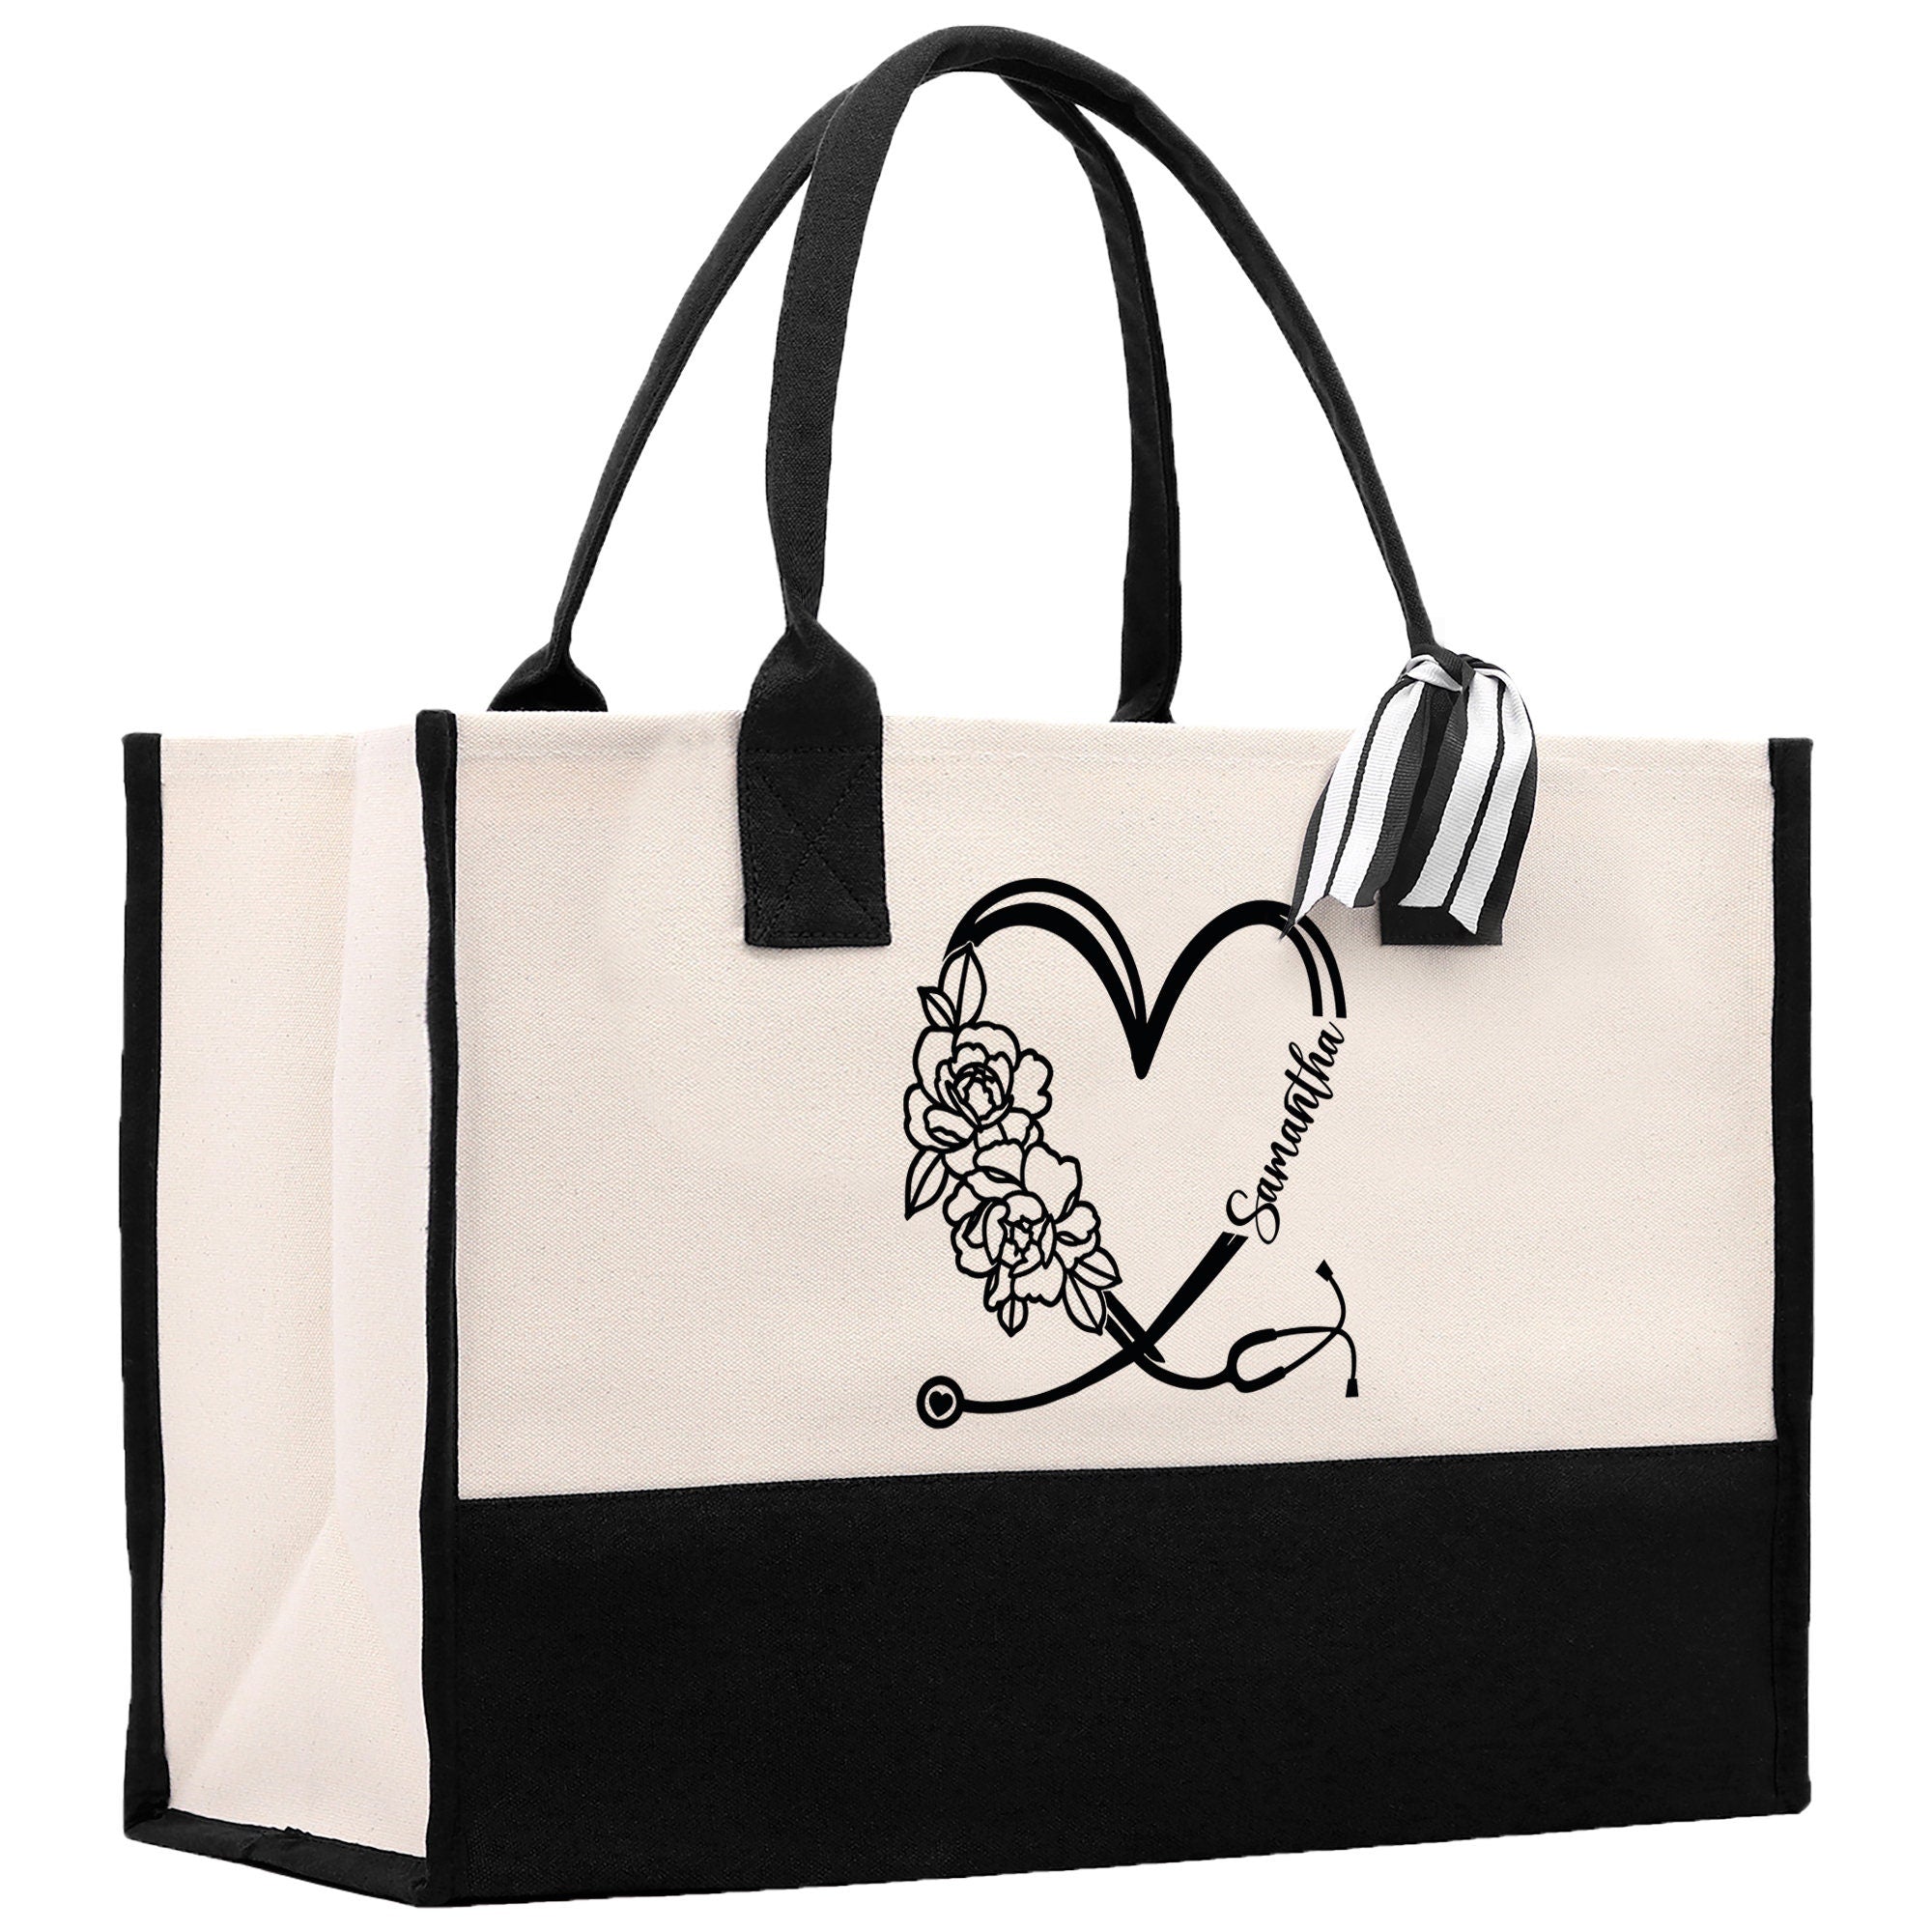 a black and white bag with a heart and flowers on it